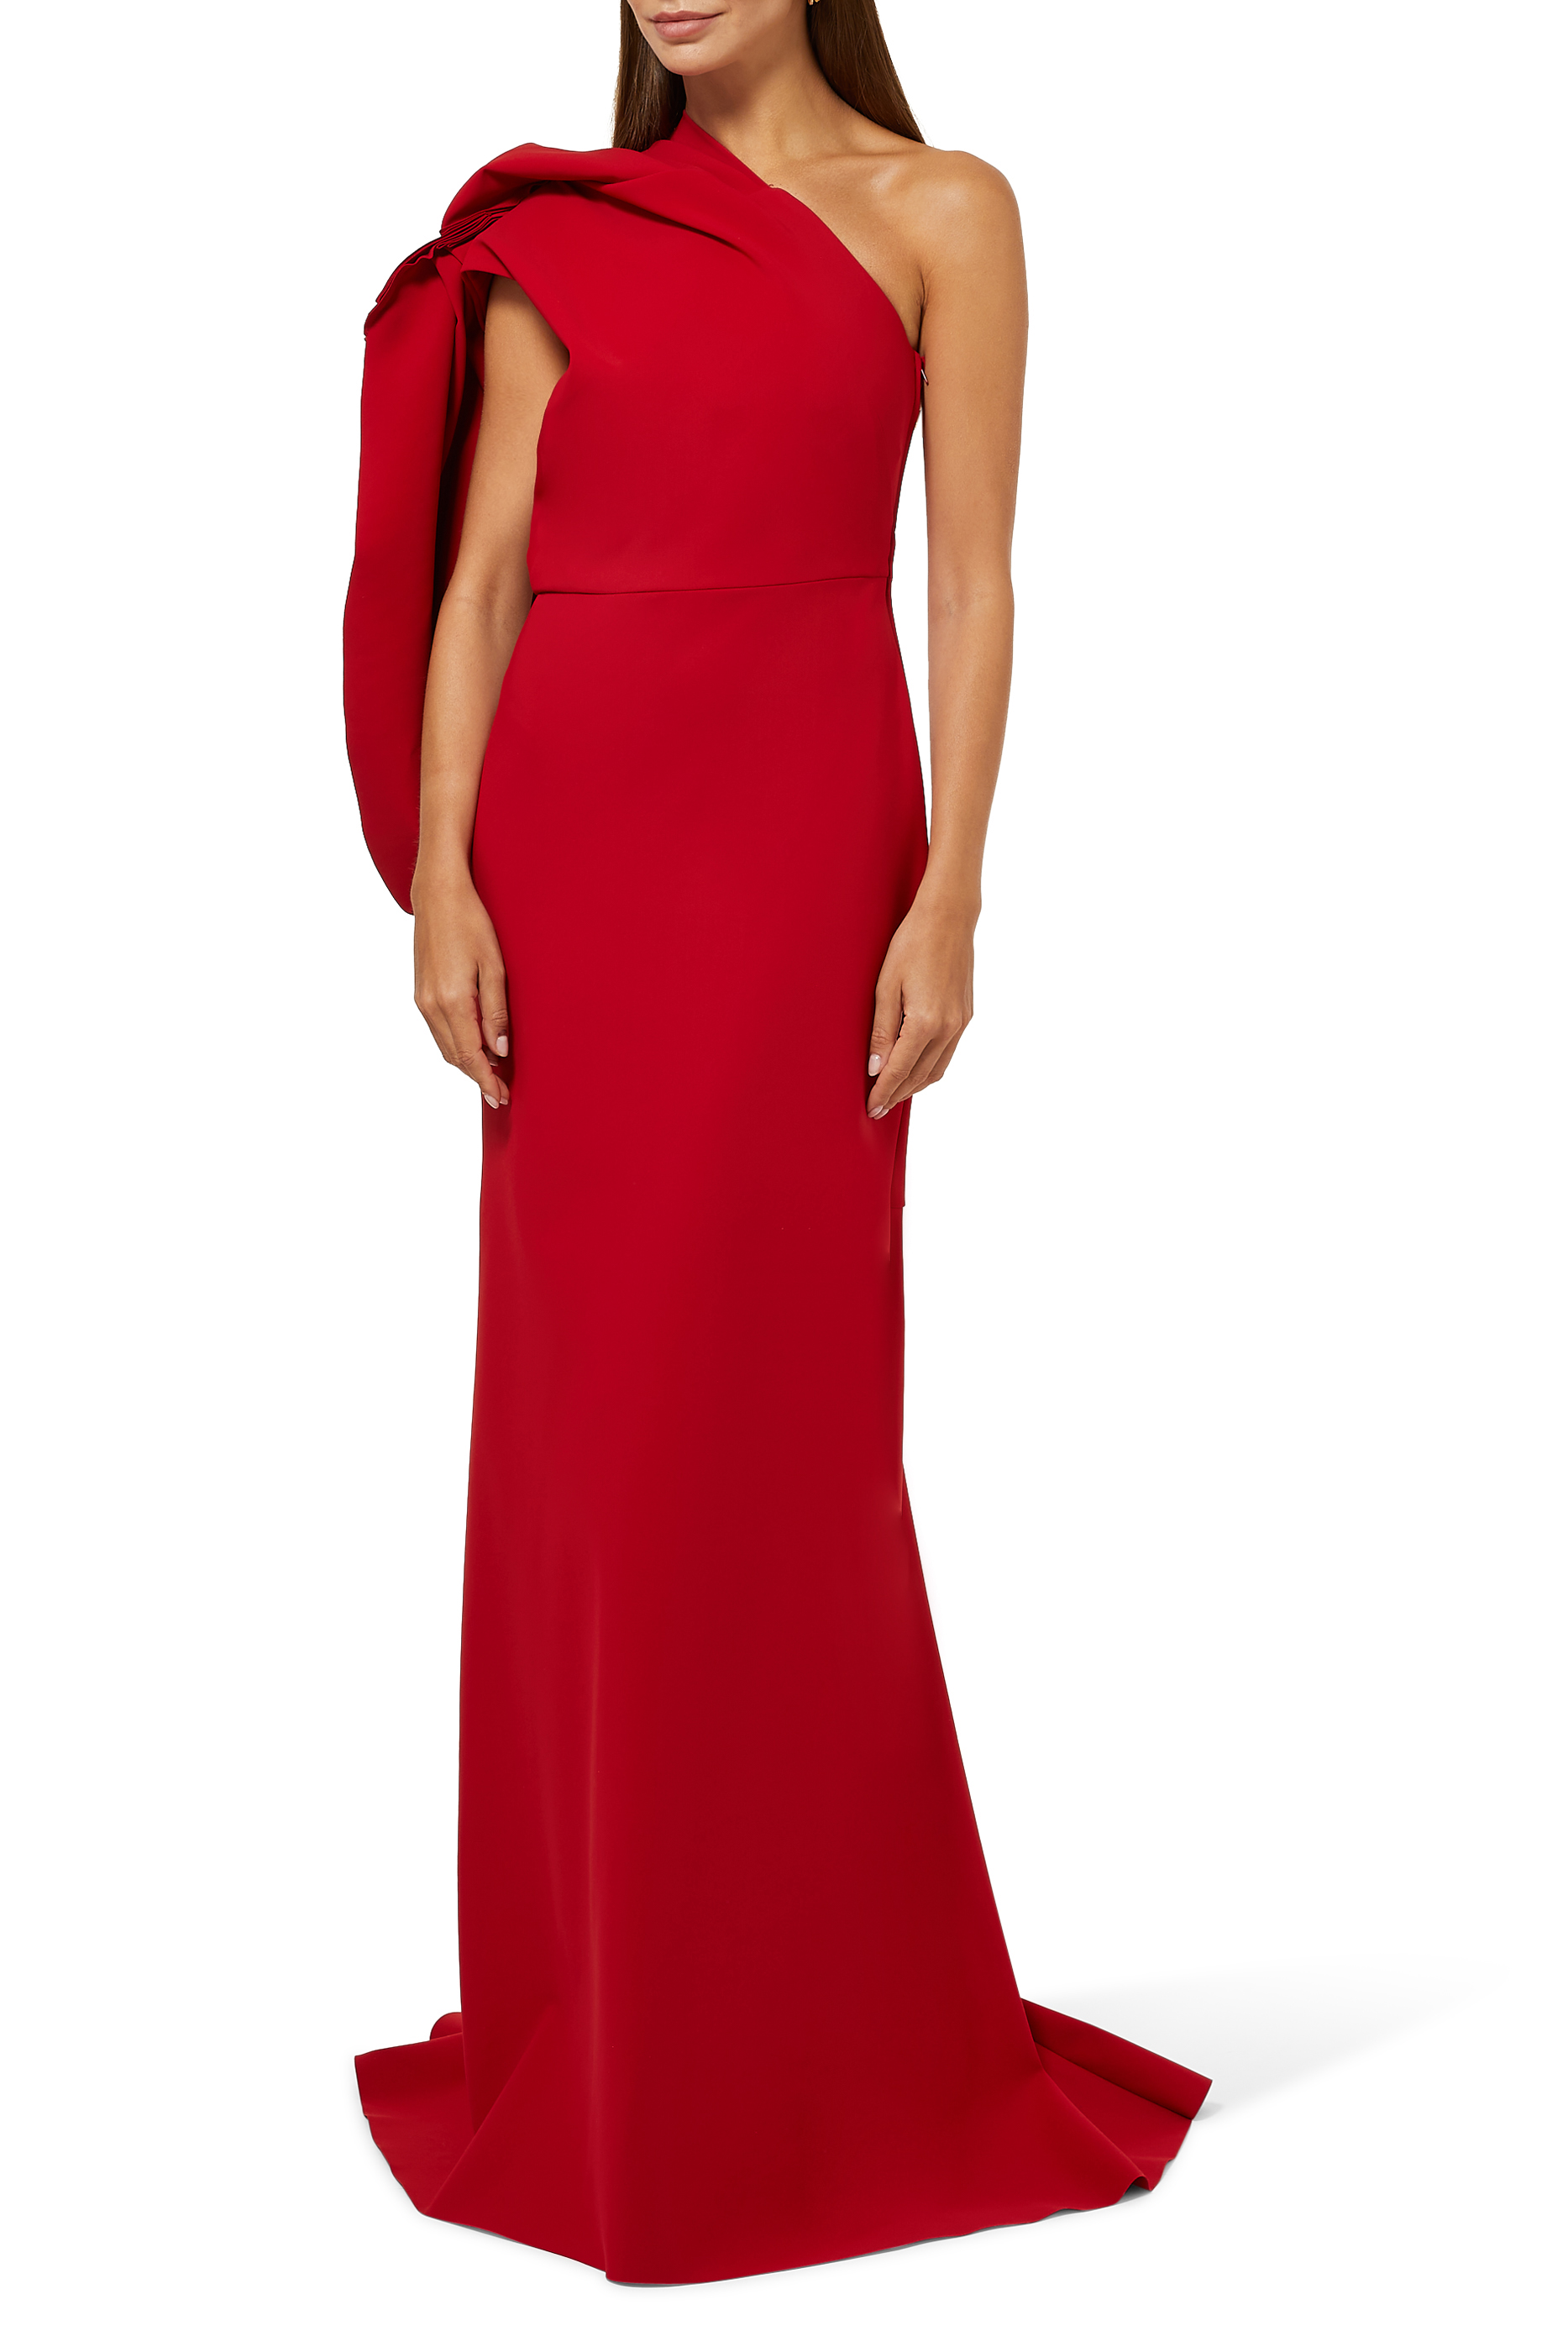 Buy Greta Constantine Lady Bona One Shoulder Gown - Womens for AED 3275 ...